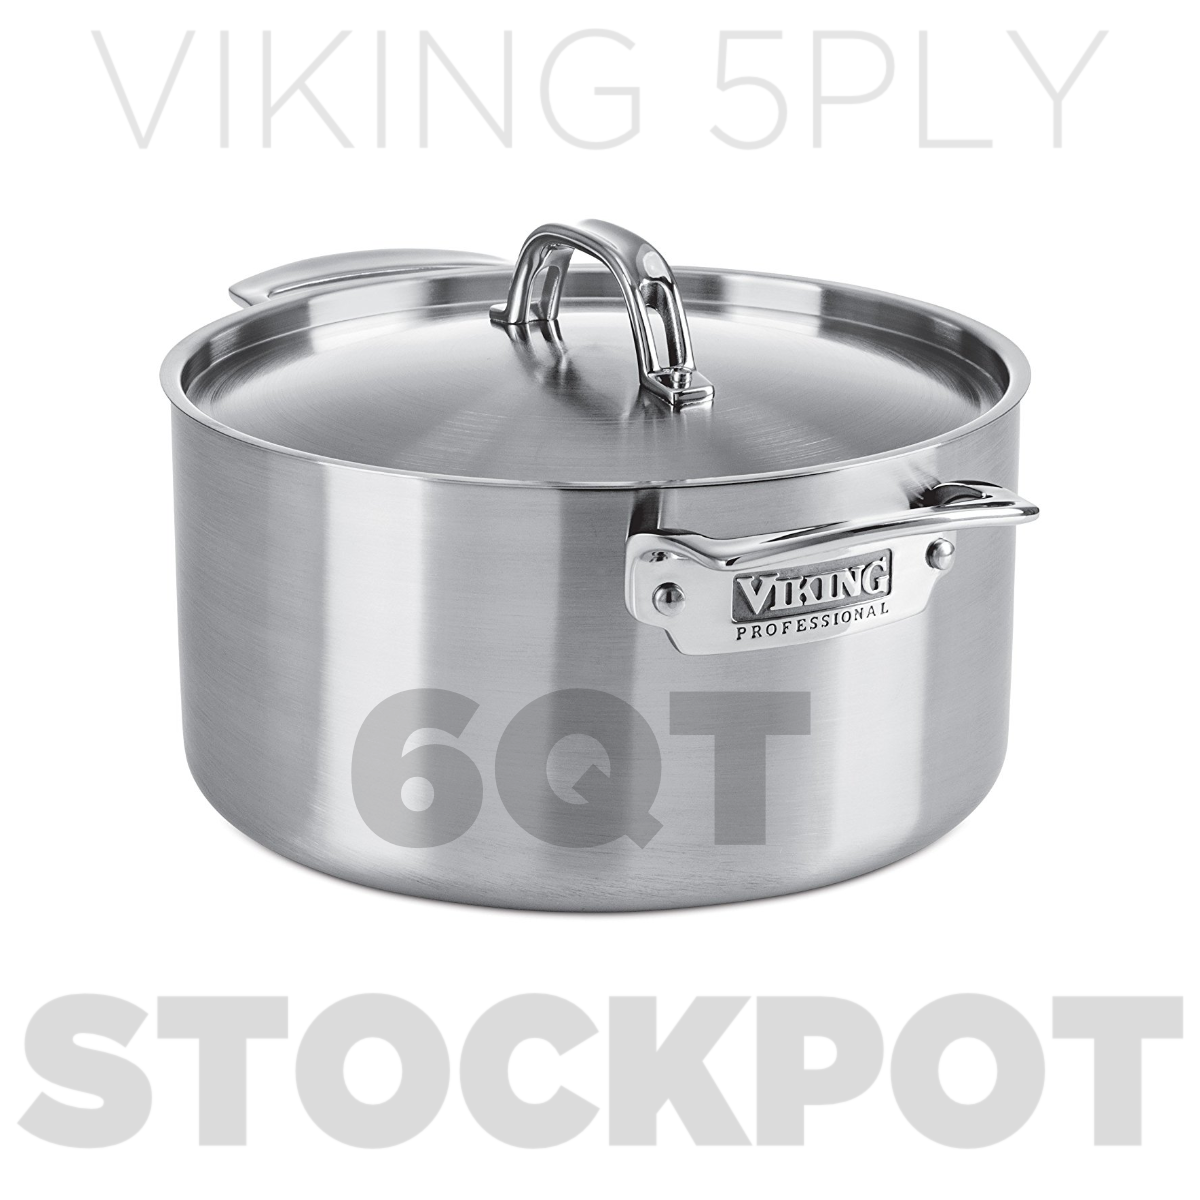 Viking Professional 5-Ply Stainless Steel Stockpot with Lid, 6 Quart – The  Jazz Chef